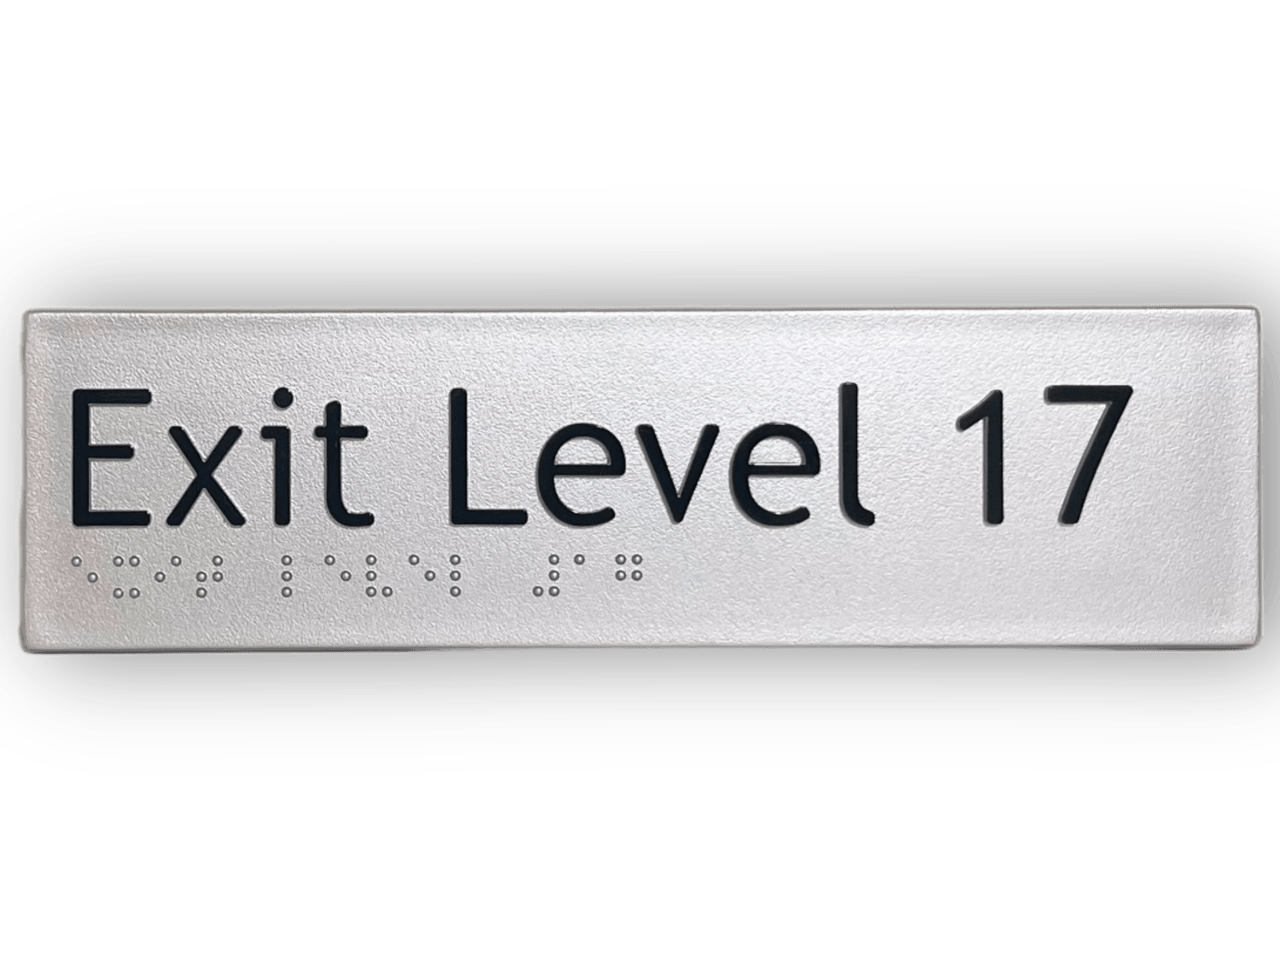 BRAILLE EXIT LEVEL 17 SIGN